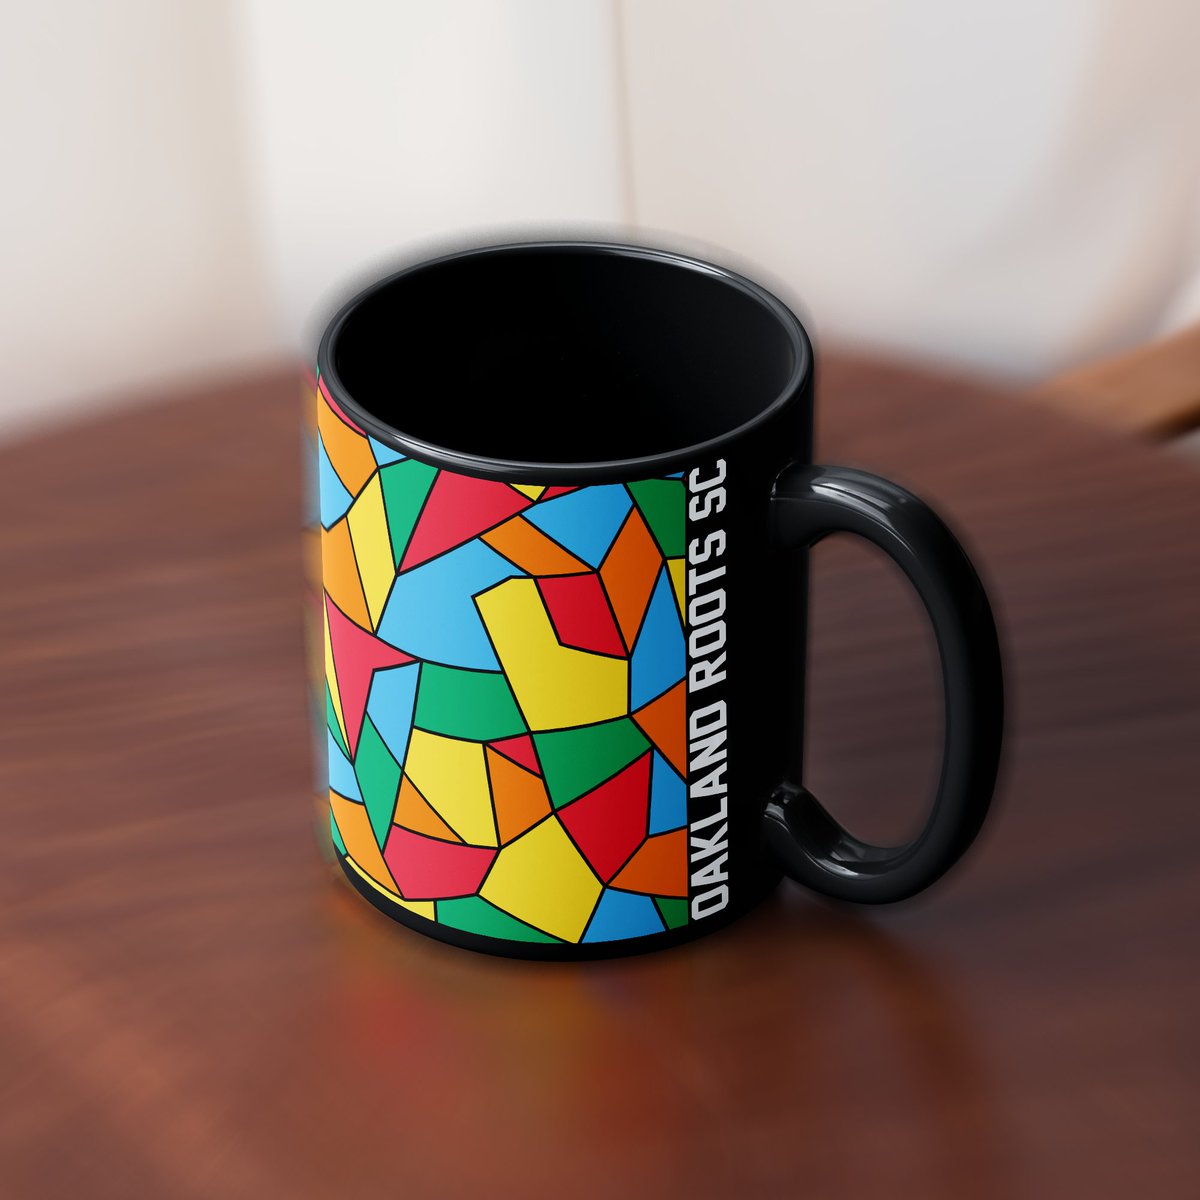 Start your morning the right way. ☕️ The Mosaic Mug is now available for purchase. ️ Shop Now: shop.oaklandrootssc.com #OaklandFirstAlways